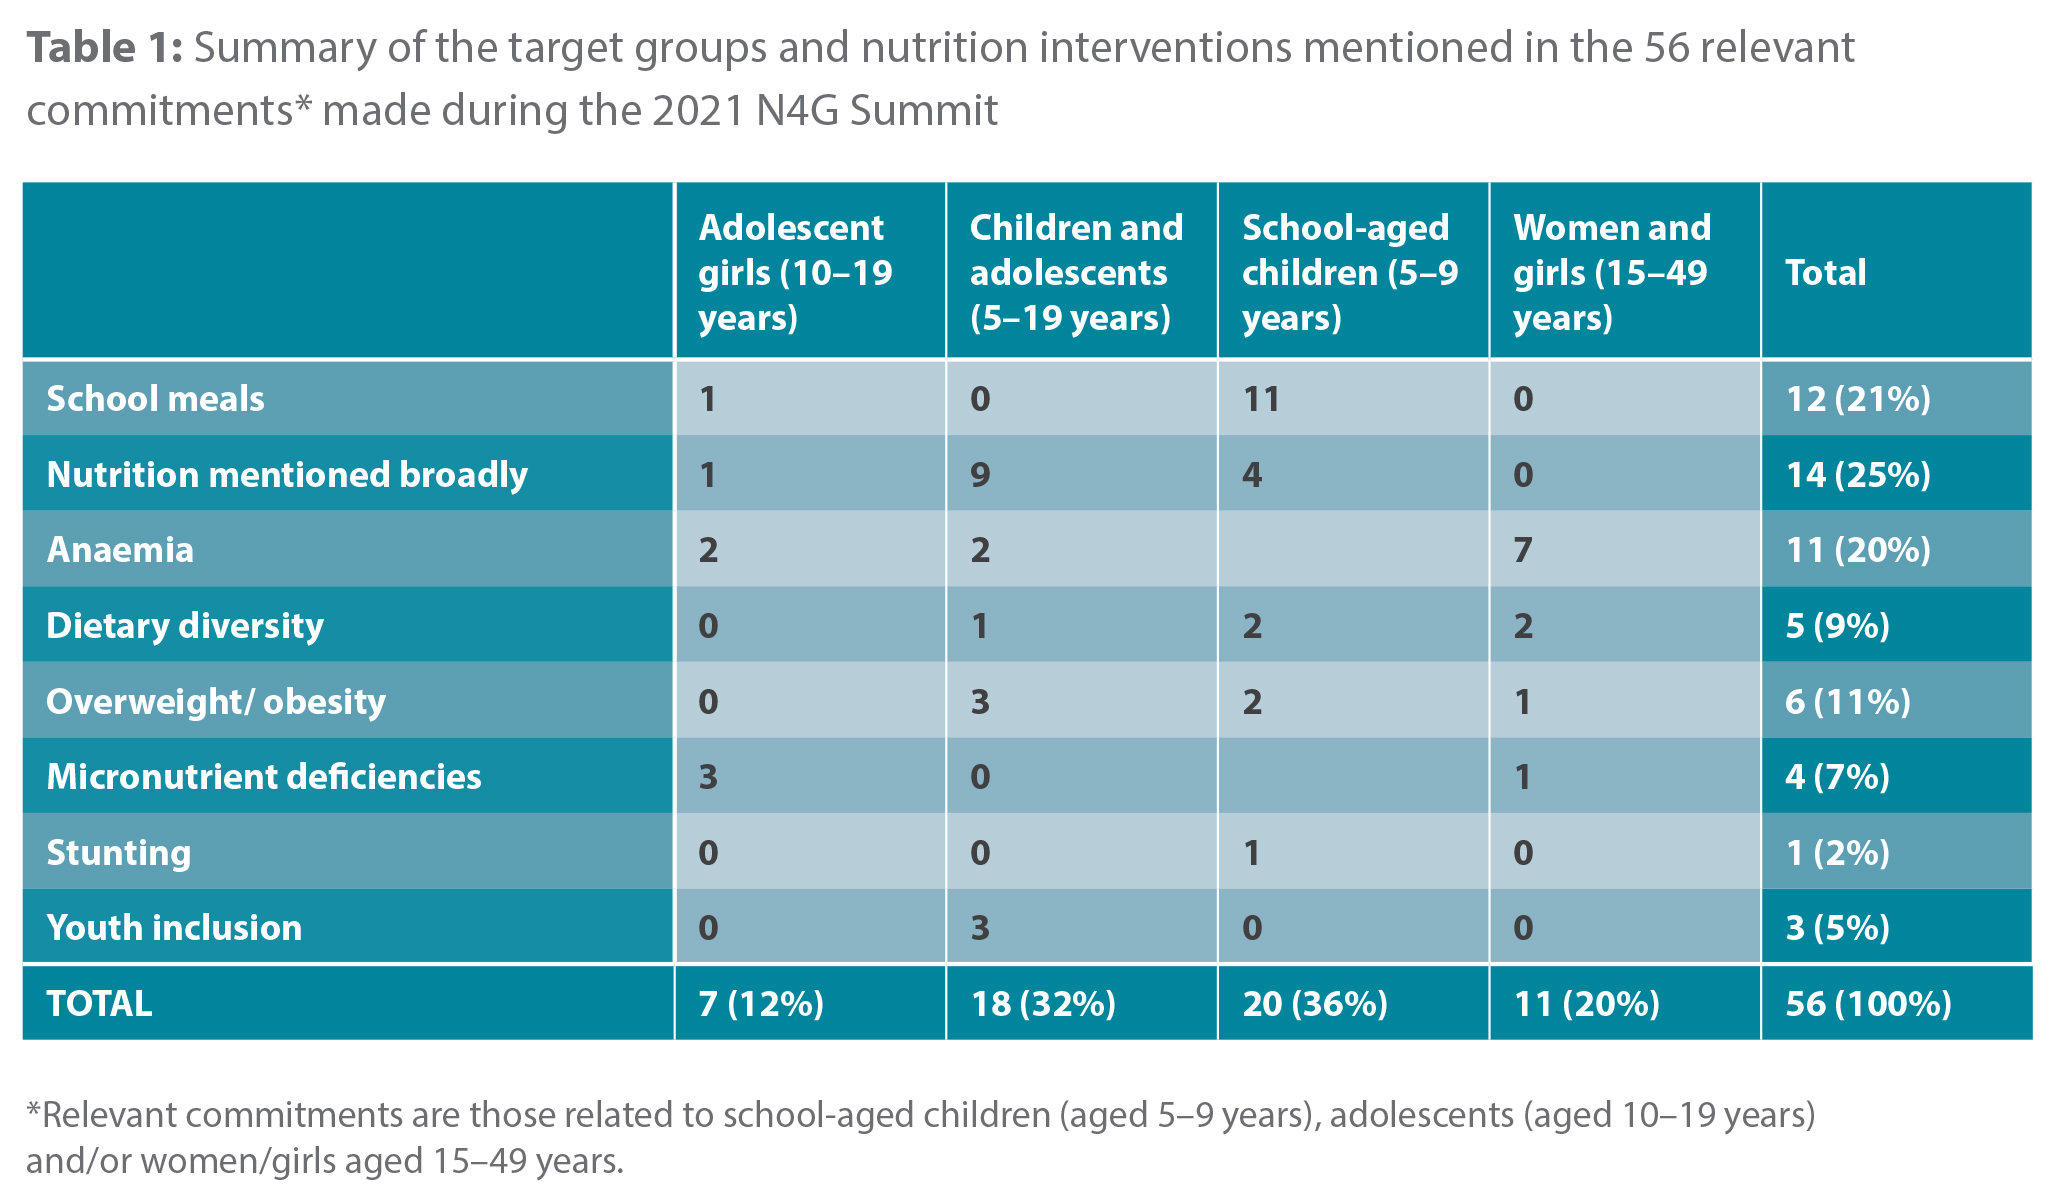 Figure 1 showing the summary of the target groups and nutrition interventions mentioned in the 56 relevant commitments made during the 2021 N4G Summit